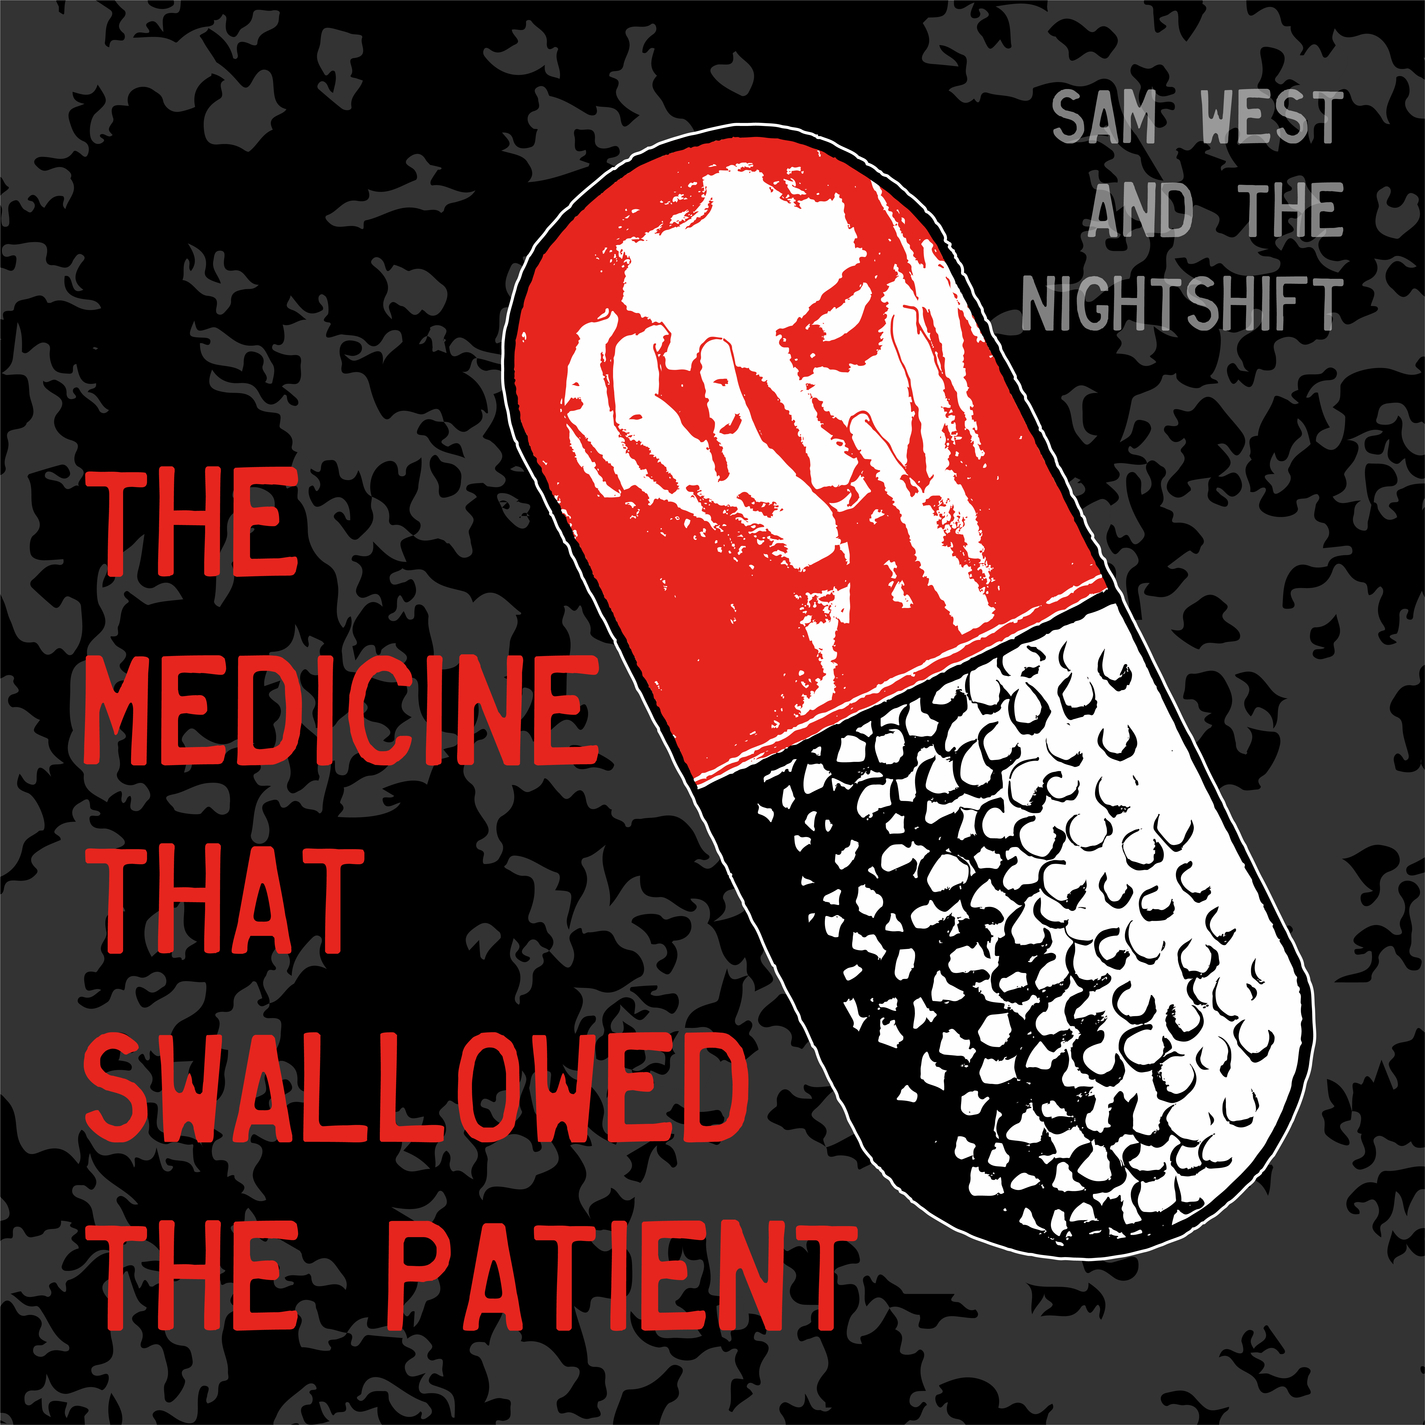 Sam West and the Nightshift - The Medicine that Swallowed the Patient